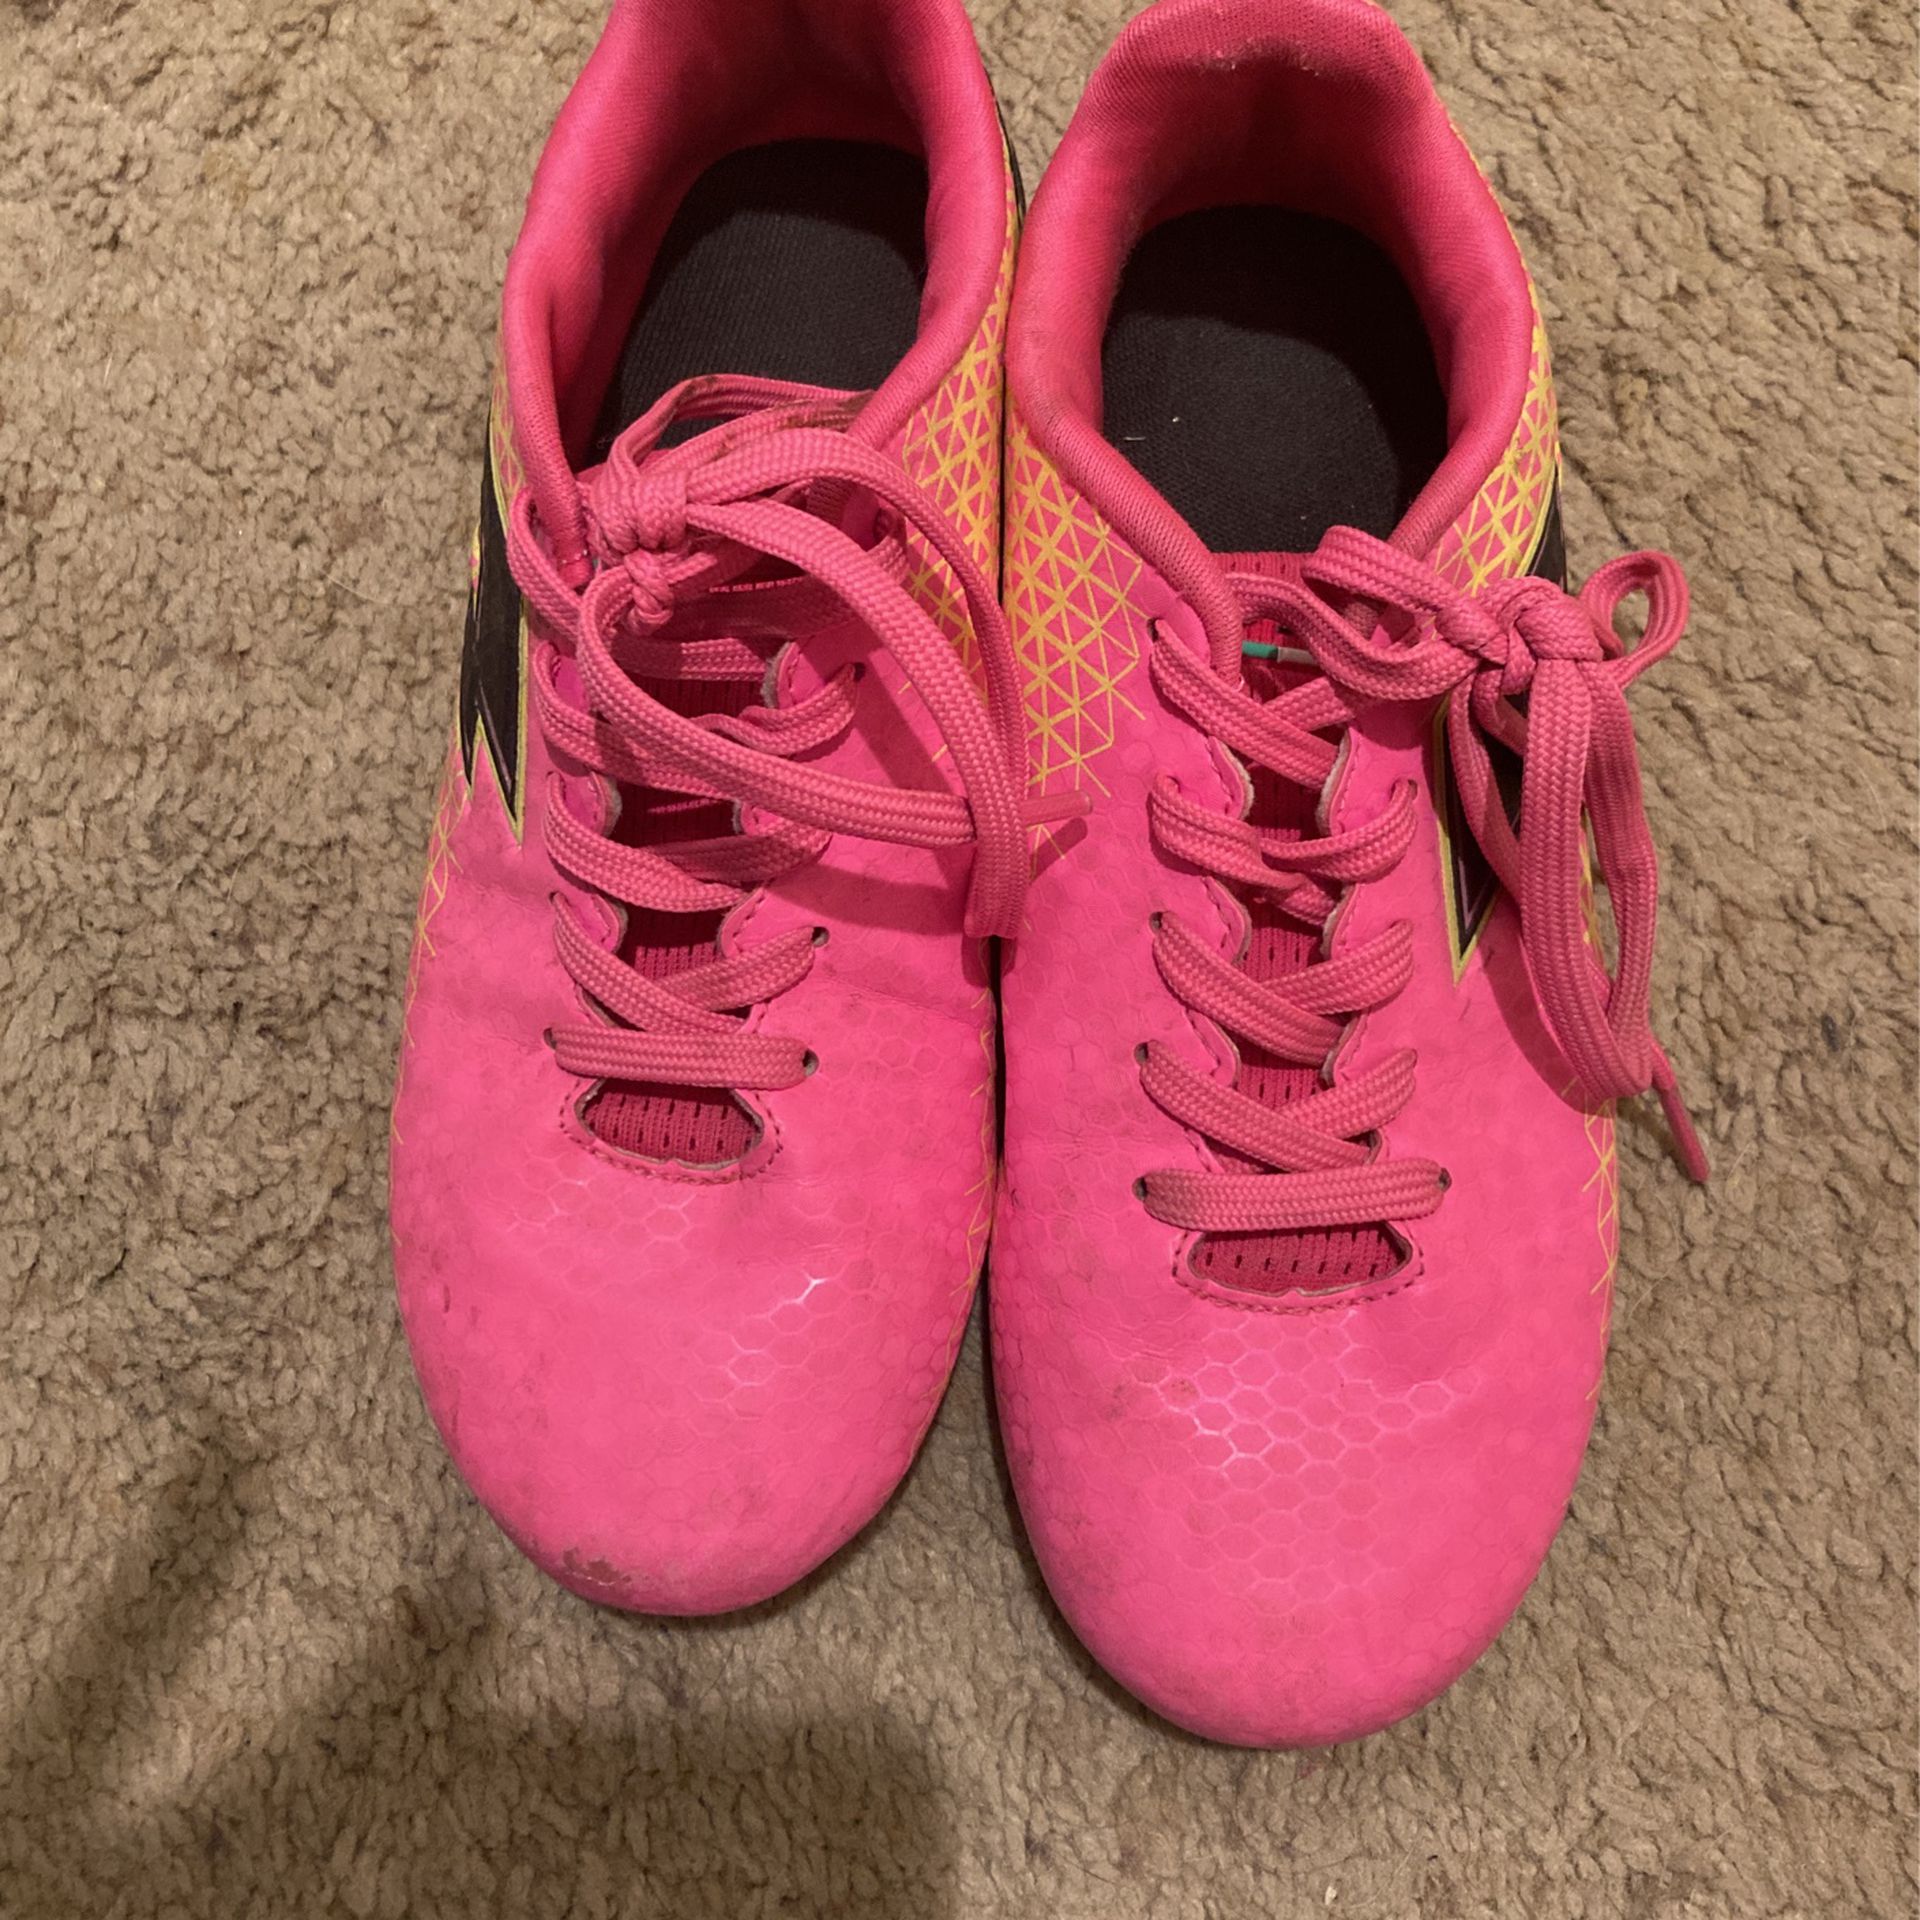 Girl Cleats Size 3.5